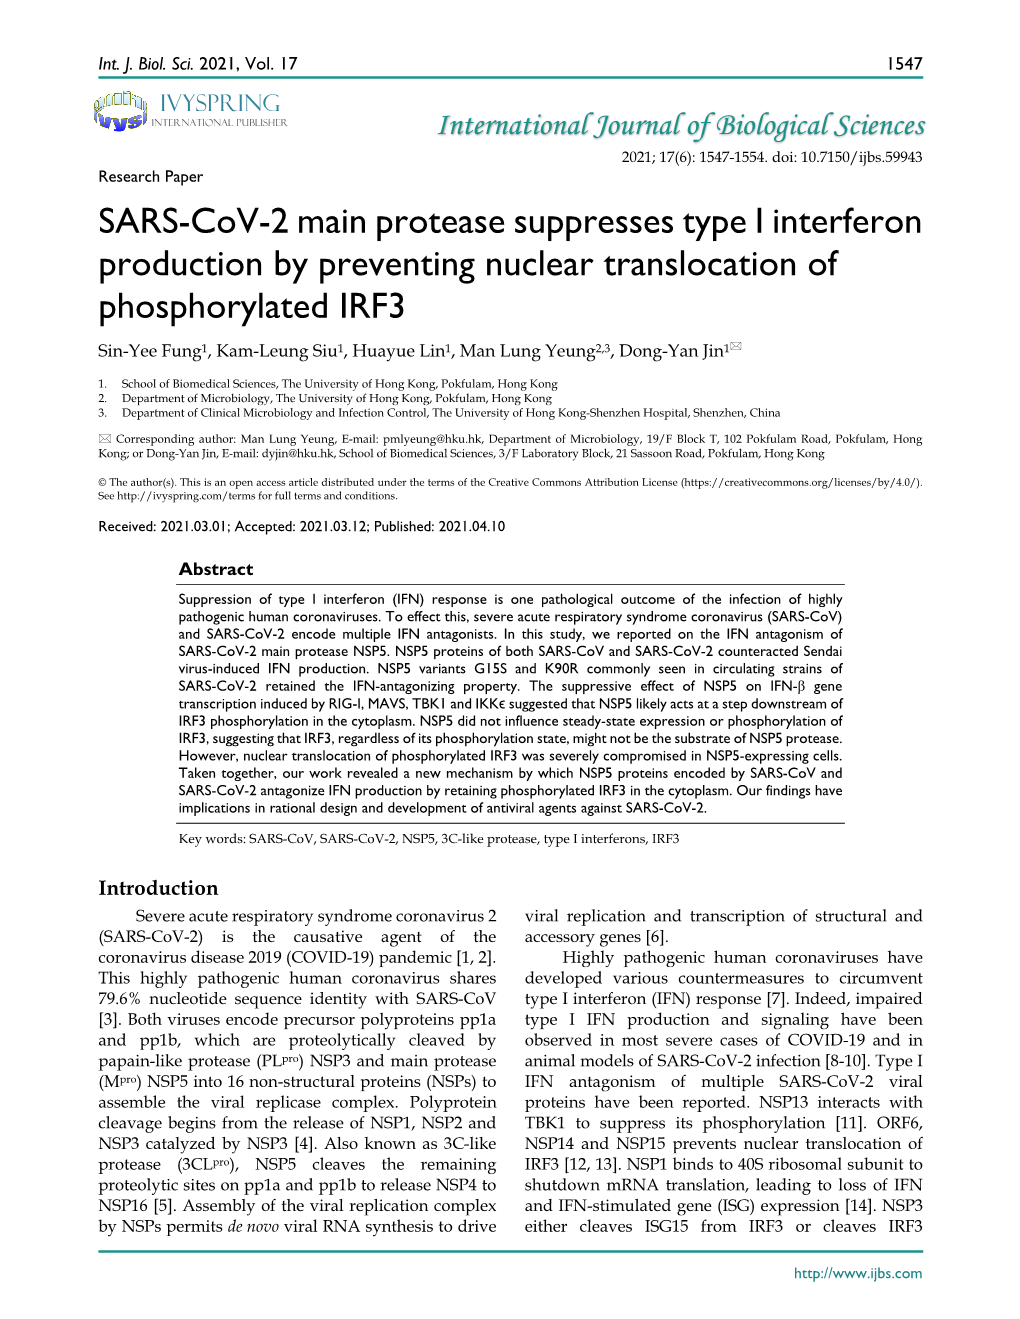 SARS-Cov-2 Main Protease Suppresses Type I Interferon Production by Preventing Nuclear Translocation of Phosphorylated IRF3